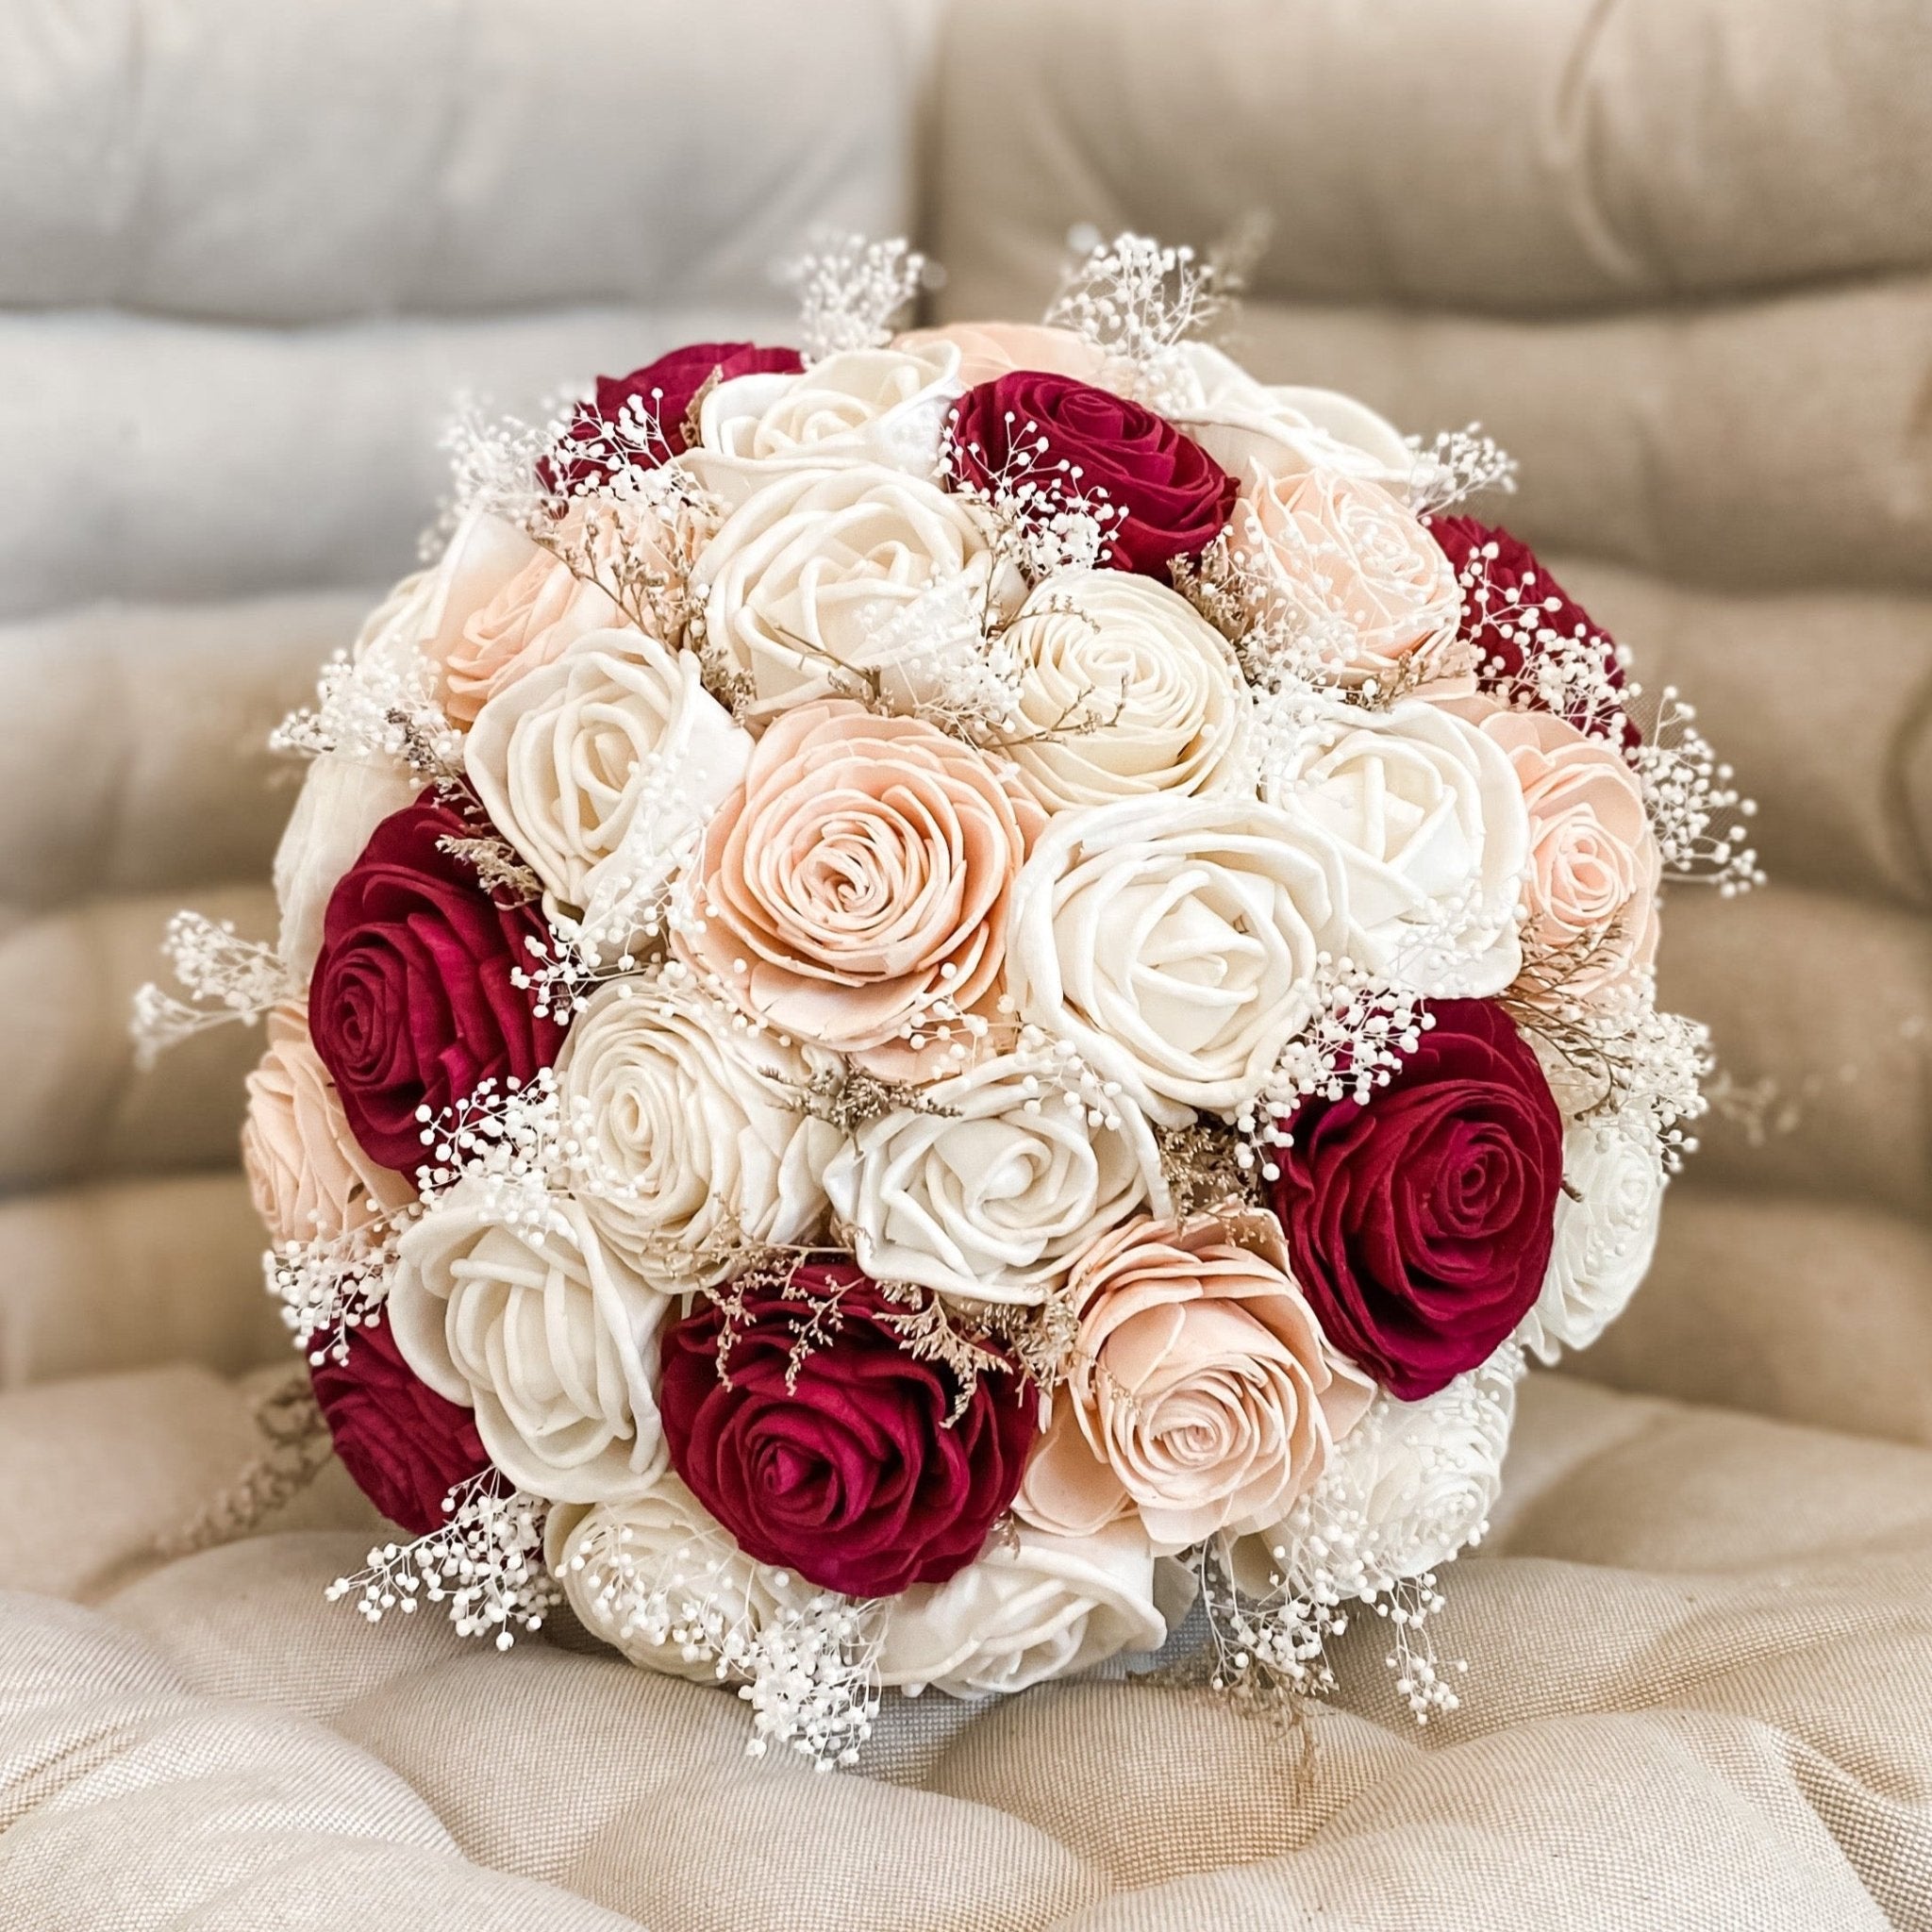 The Ivory Rose Bridal Rooms